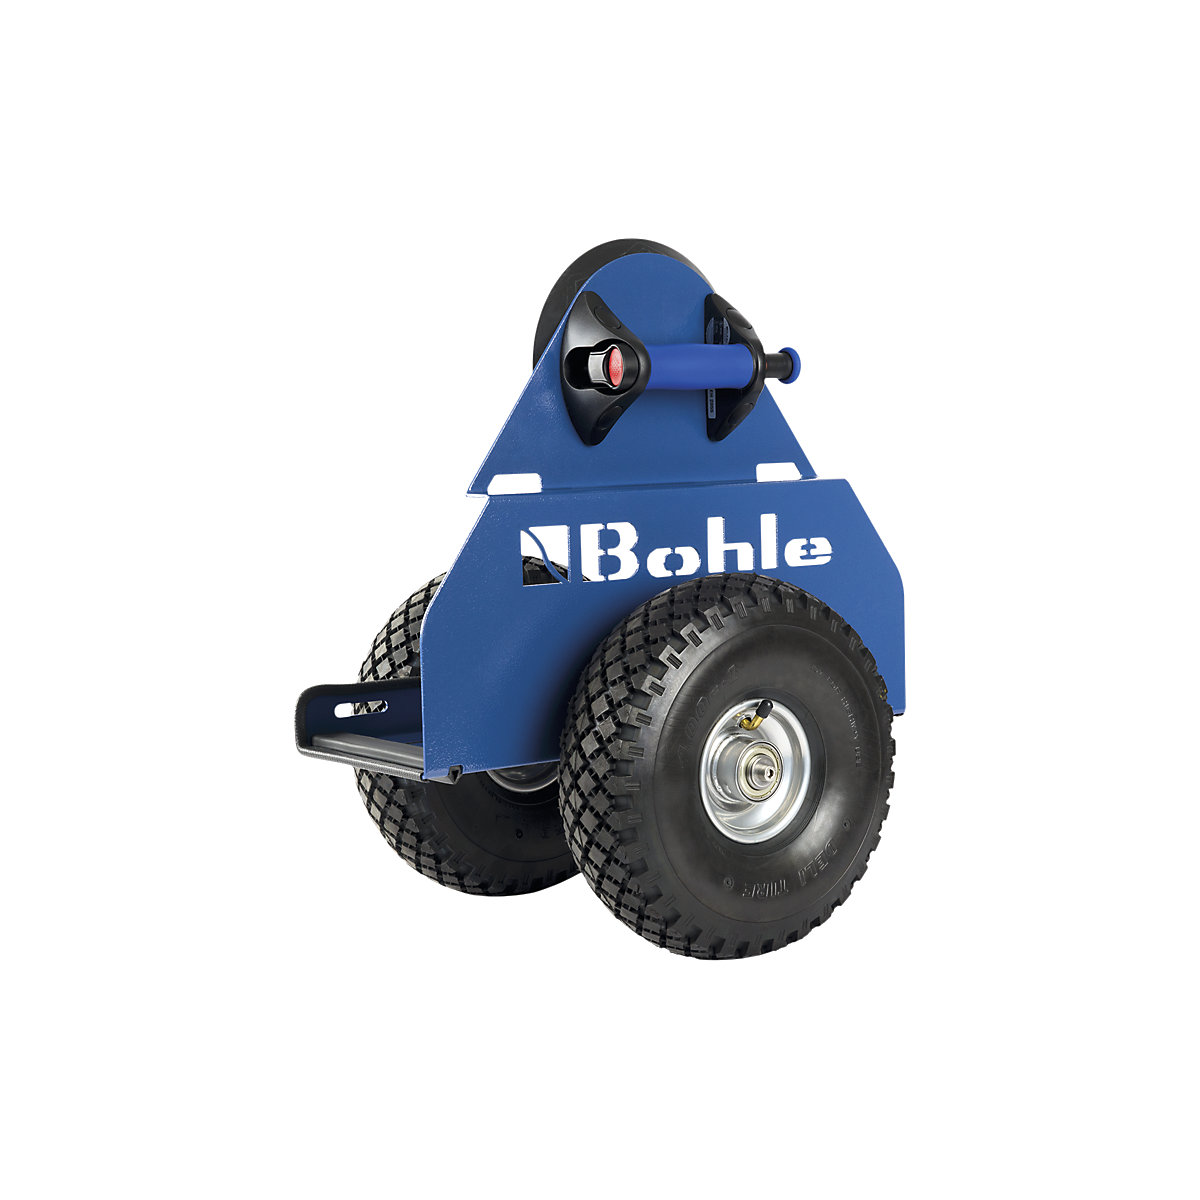 Platform trolley with VERIBOR® suction lifter – Bohle